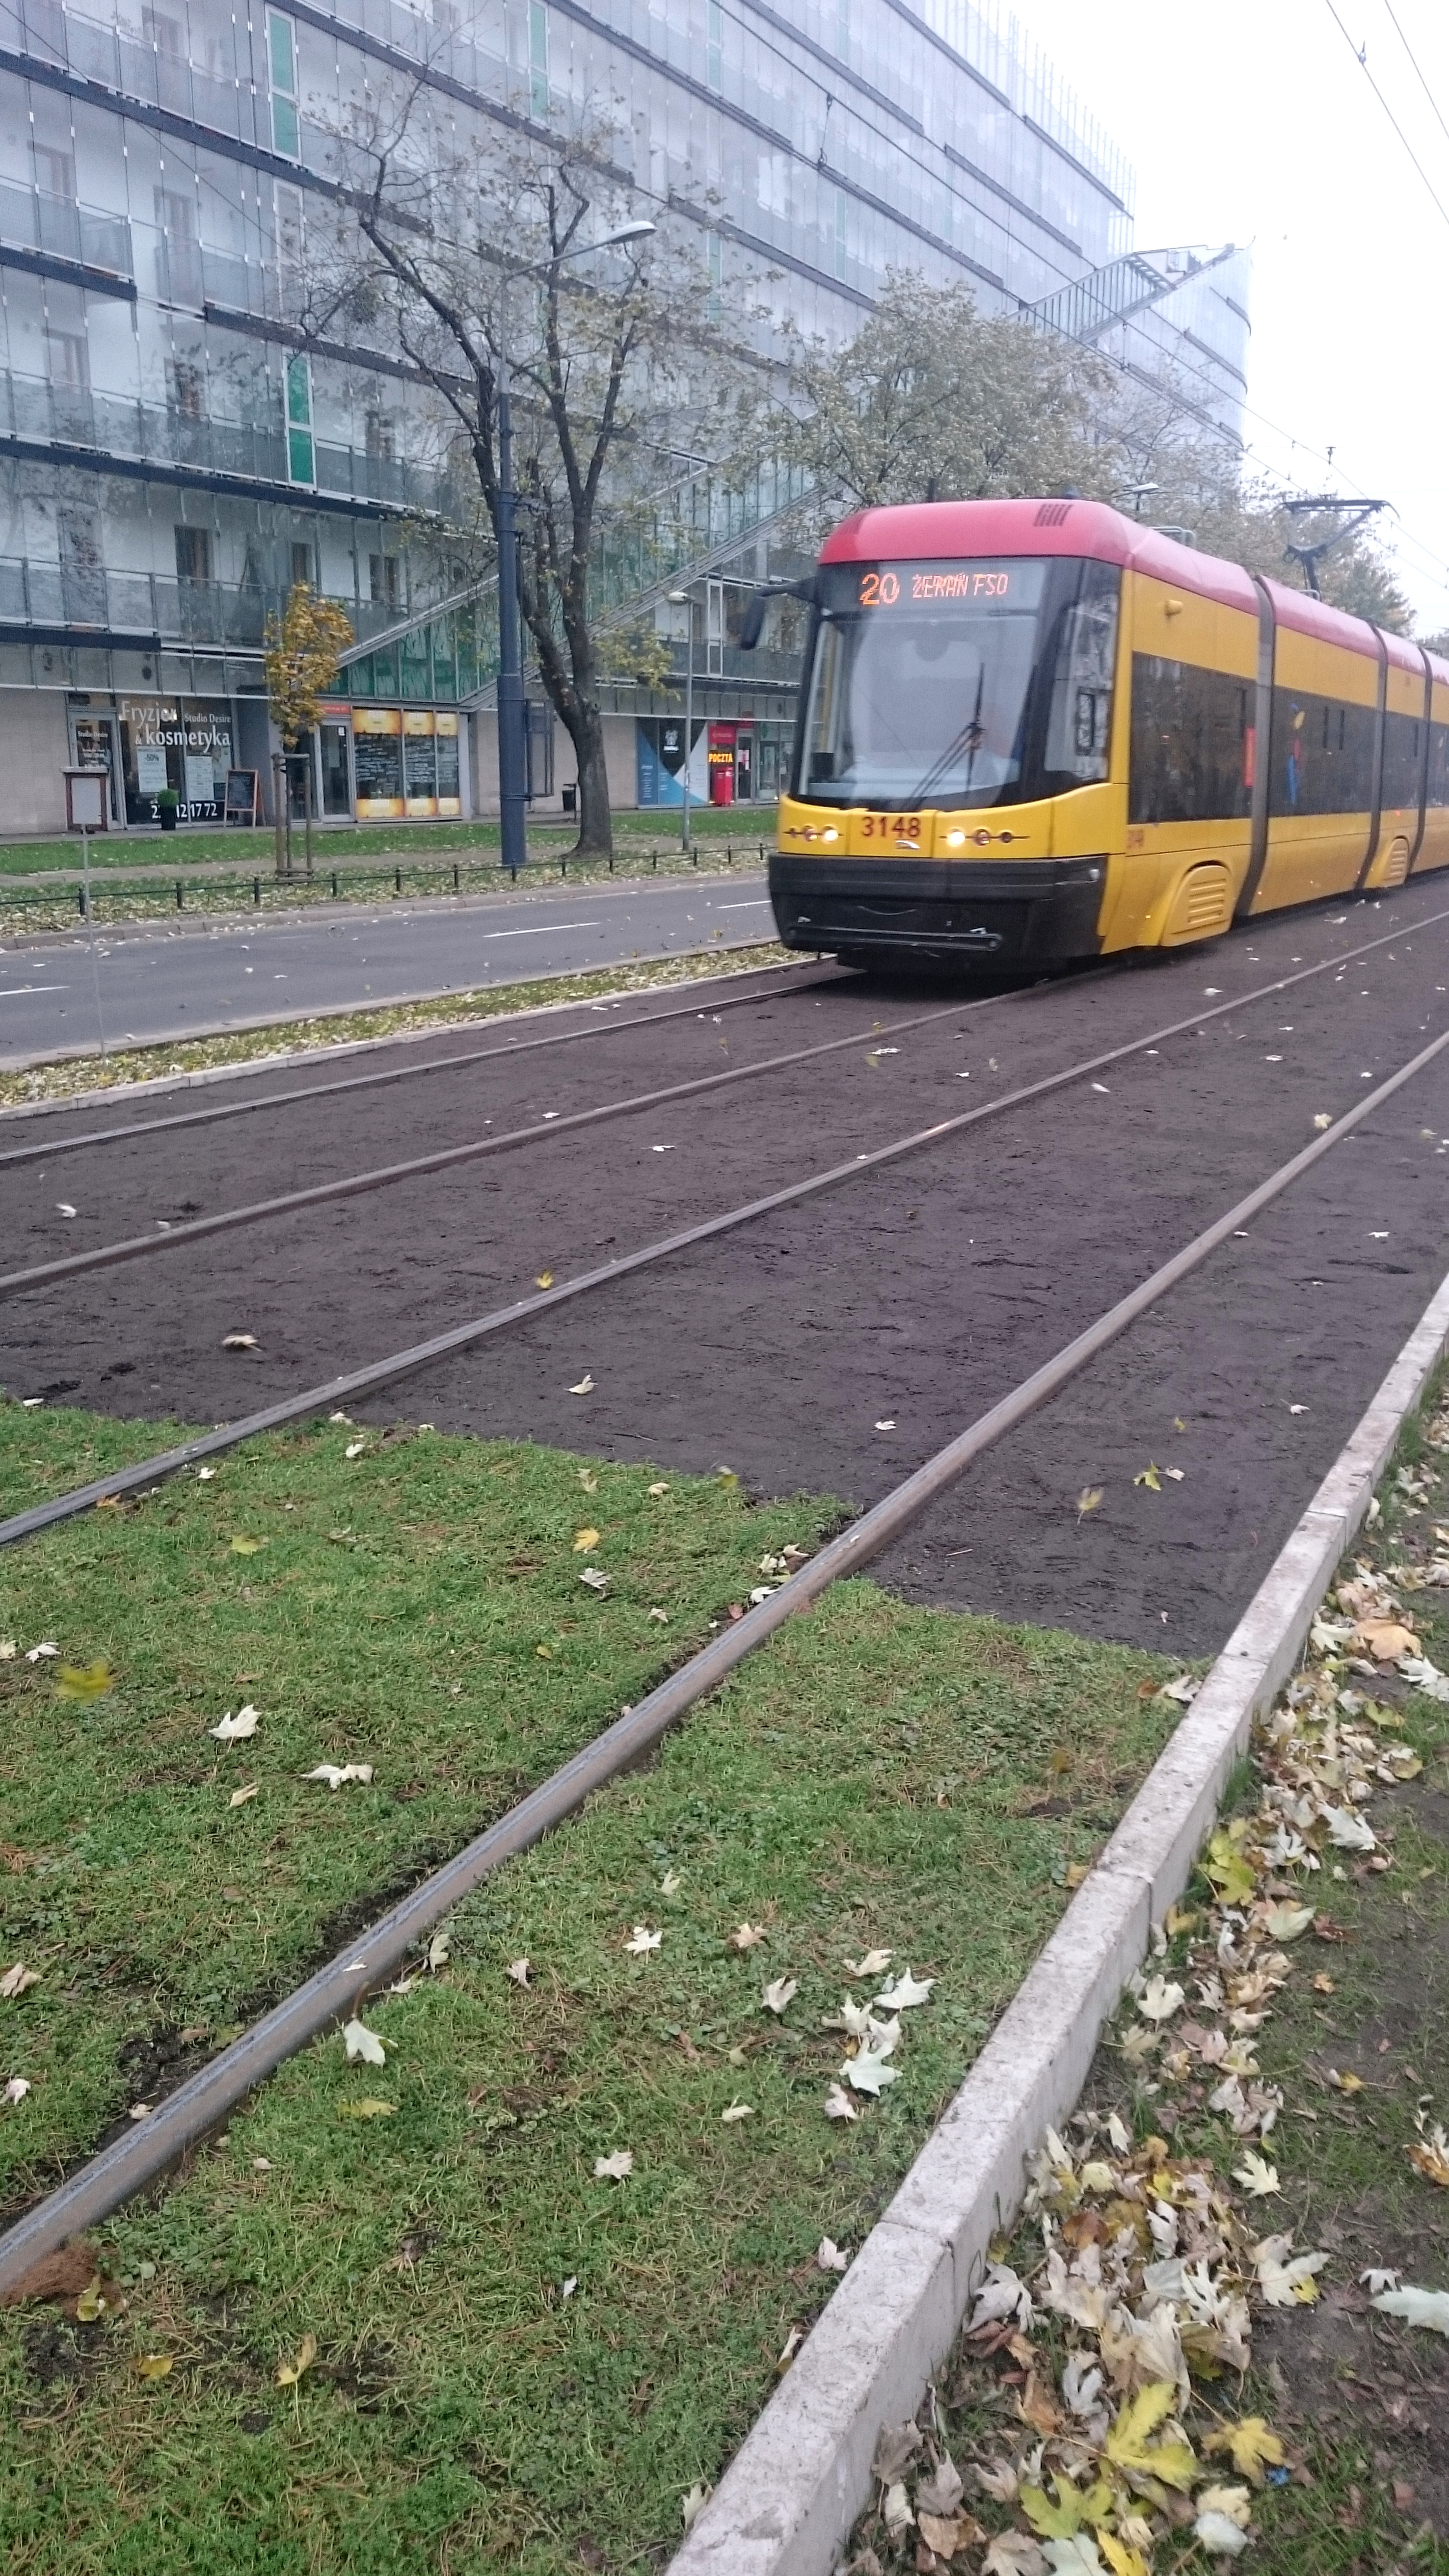 Warsaw Trams is greening the city, track by track